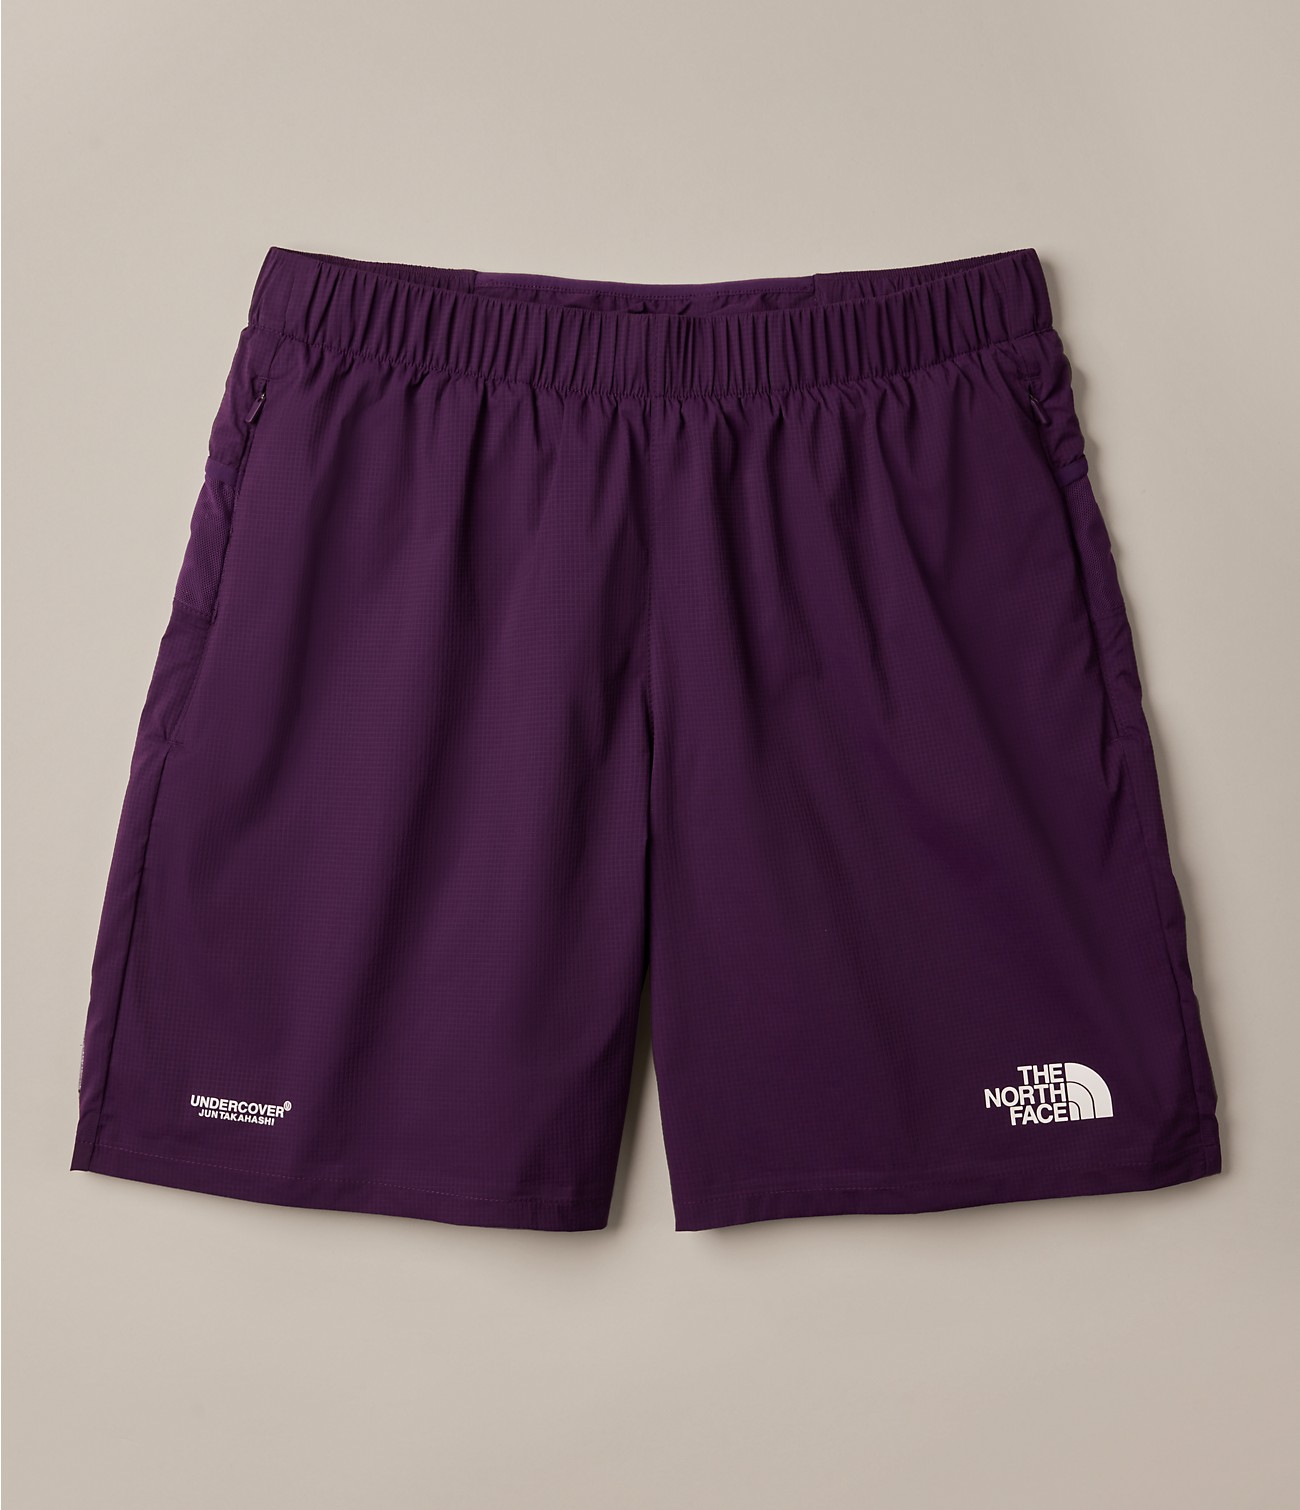 The North Face x UNDERCOVER SOUKUU Trail Run Utility 2-in-1 Shorts |